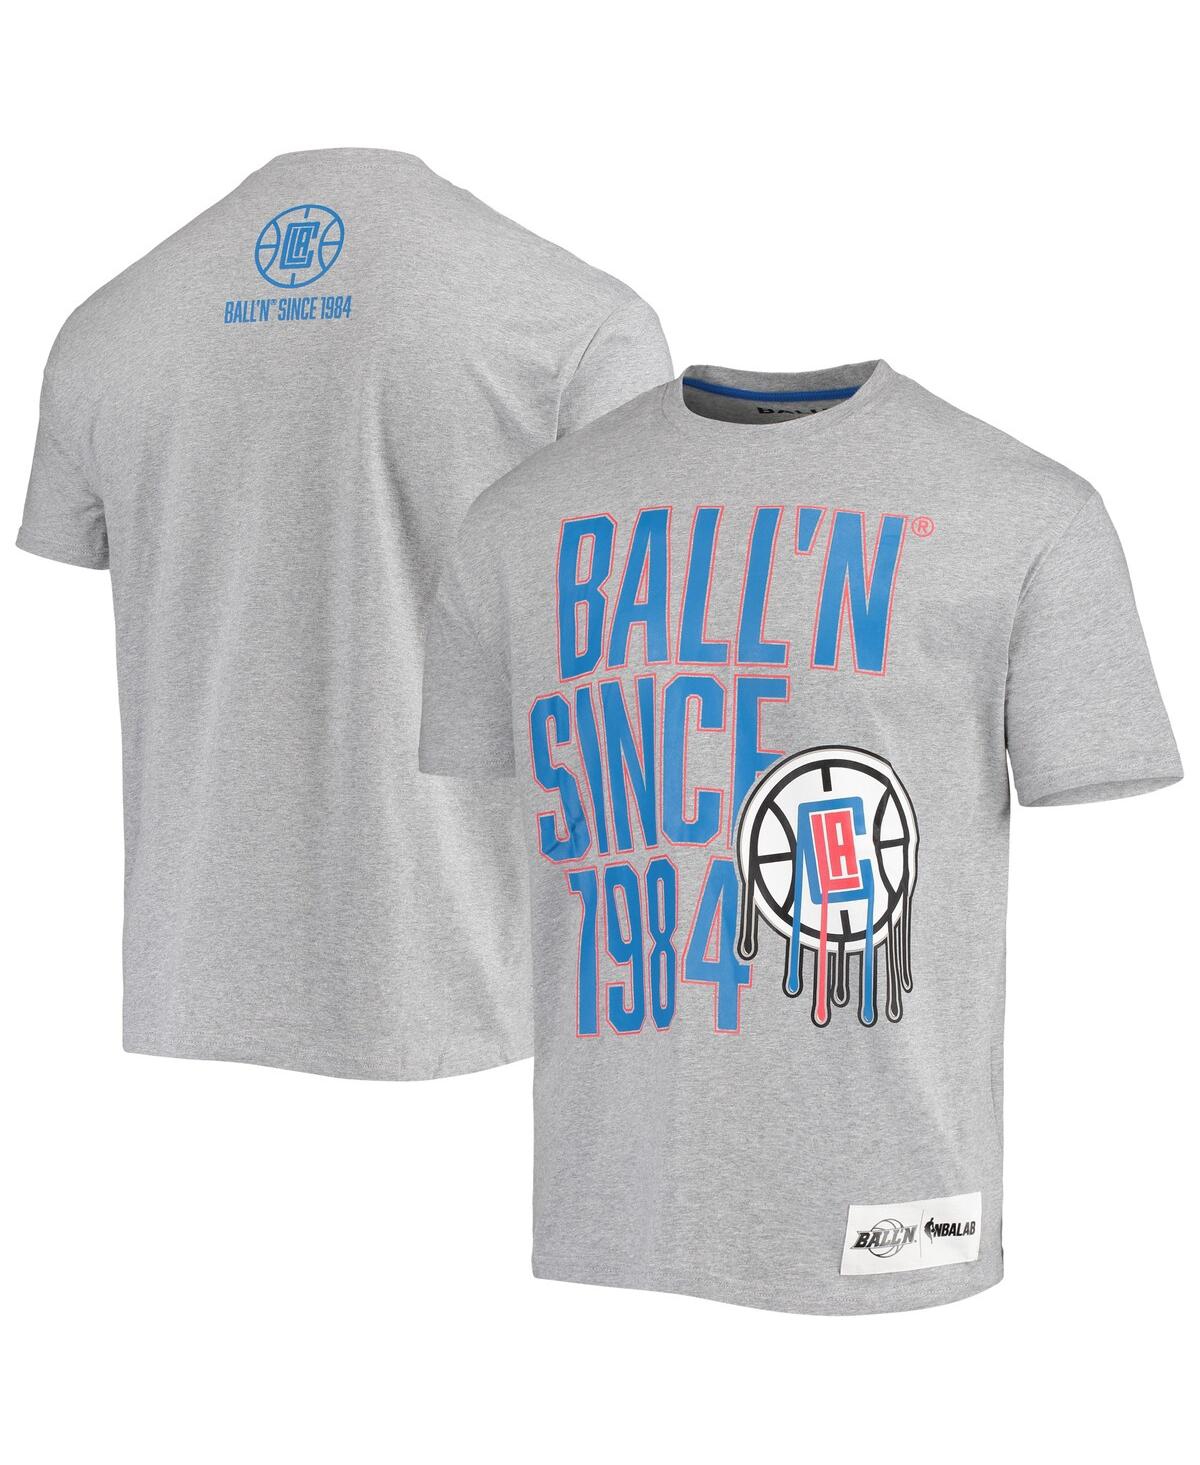 Men's Ball'N Heather Gray La Clippers Since 1984 T-shirt - Heathered Gray